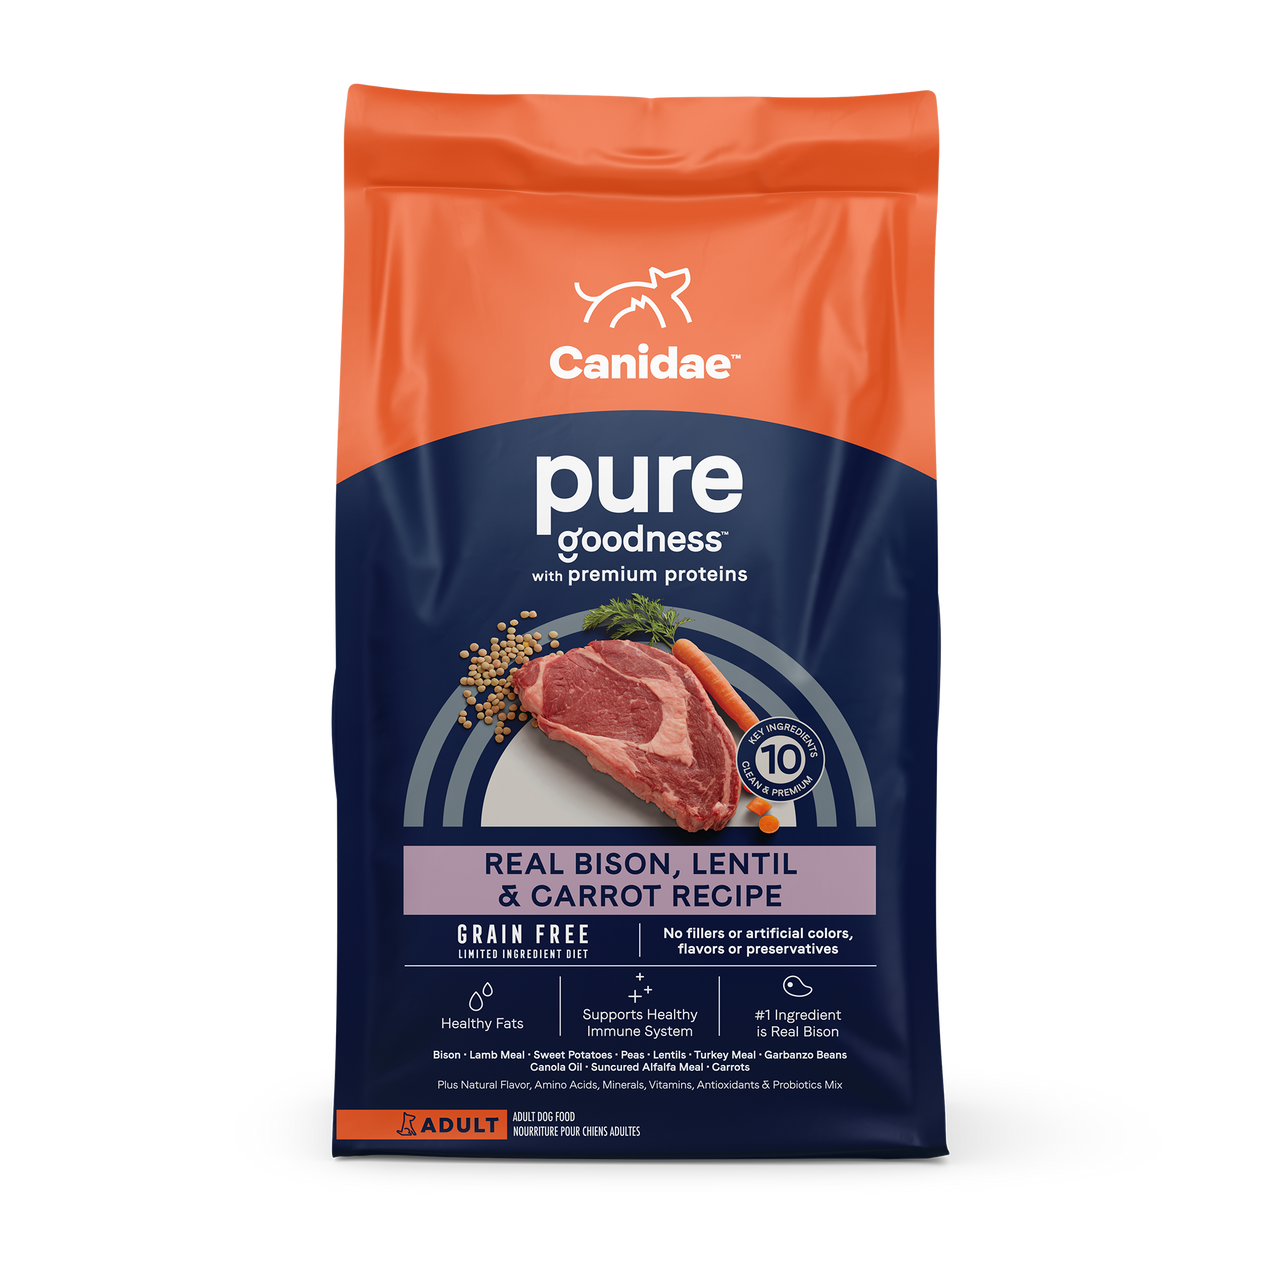 Canidae Pure Grain Free Adult Bison Dry Dog Food